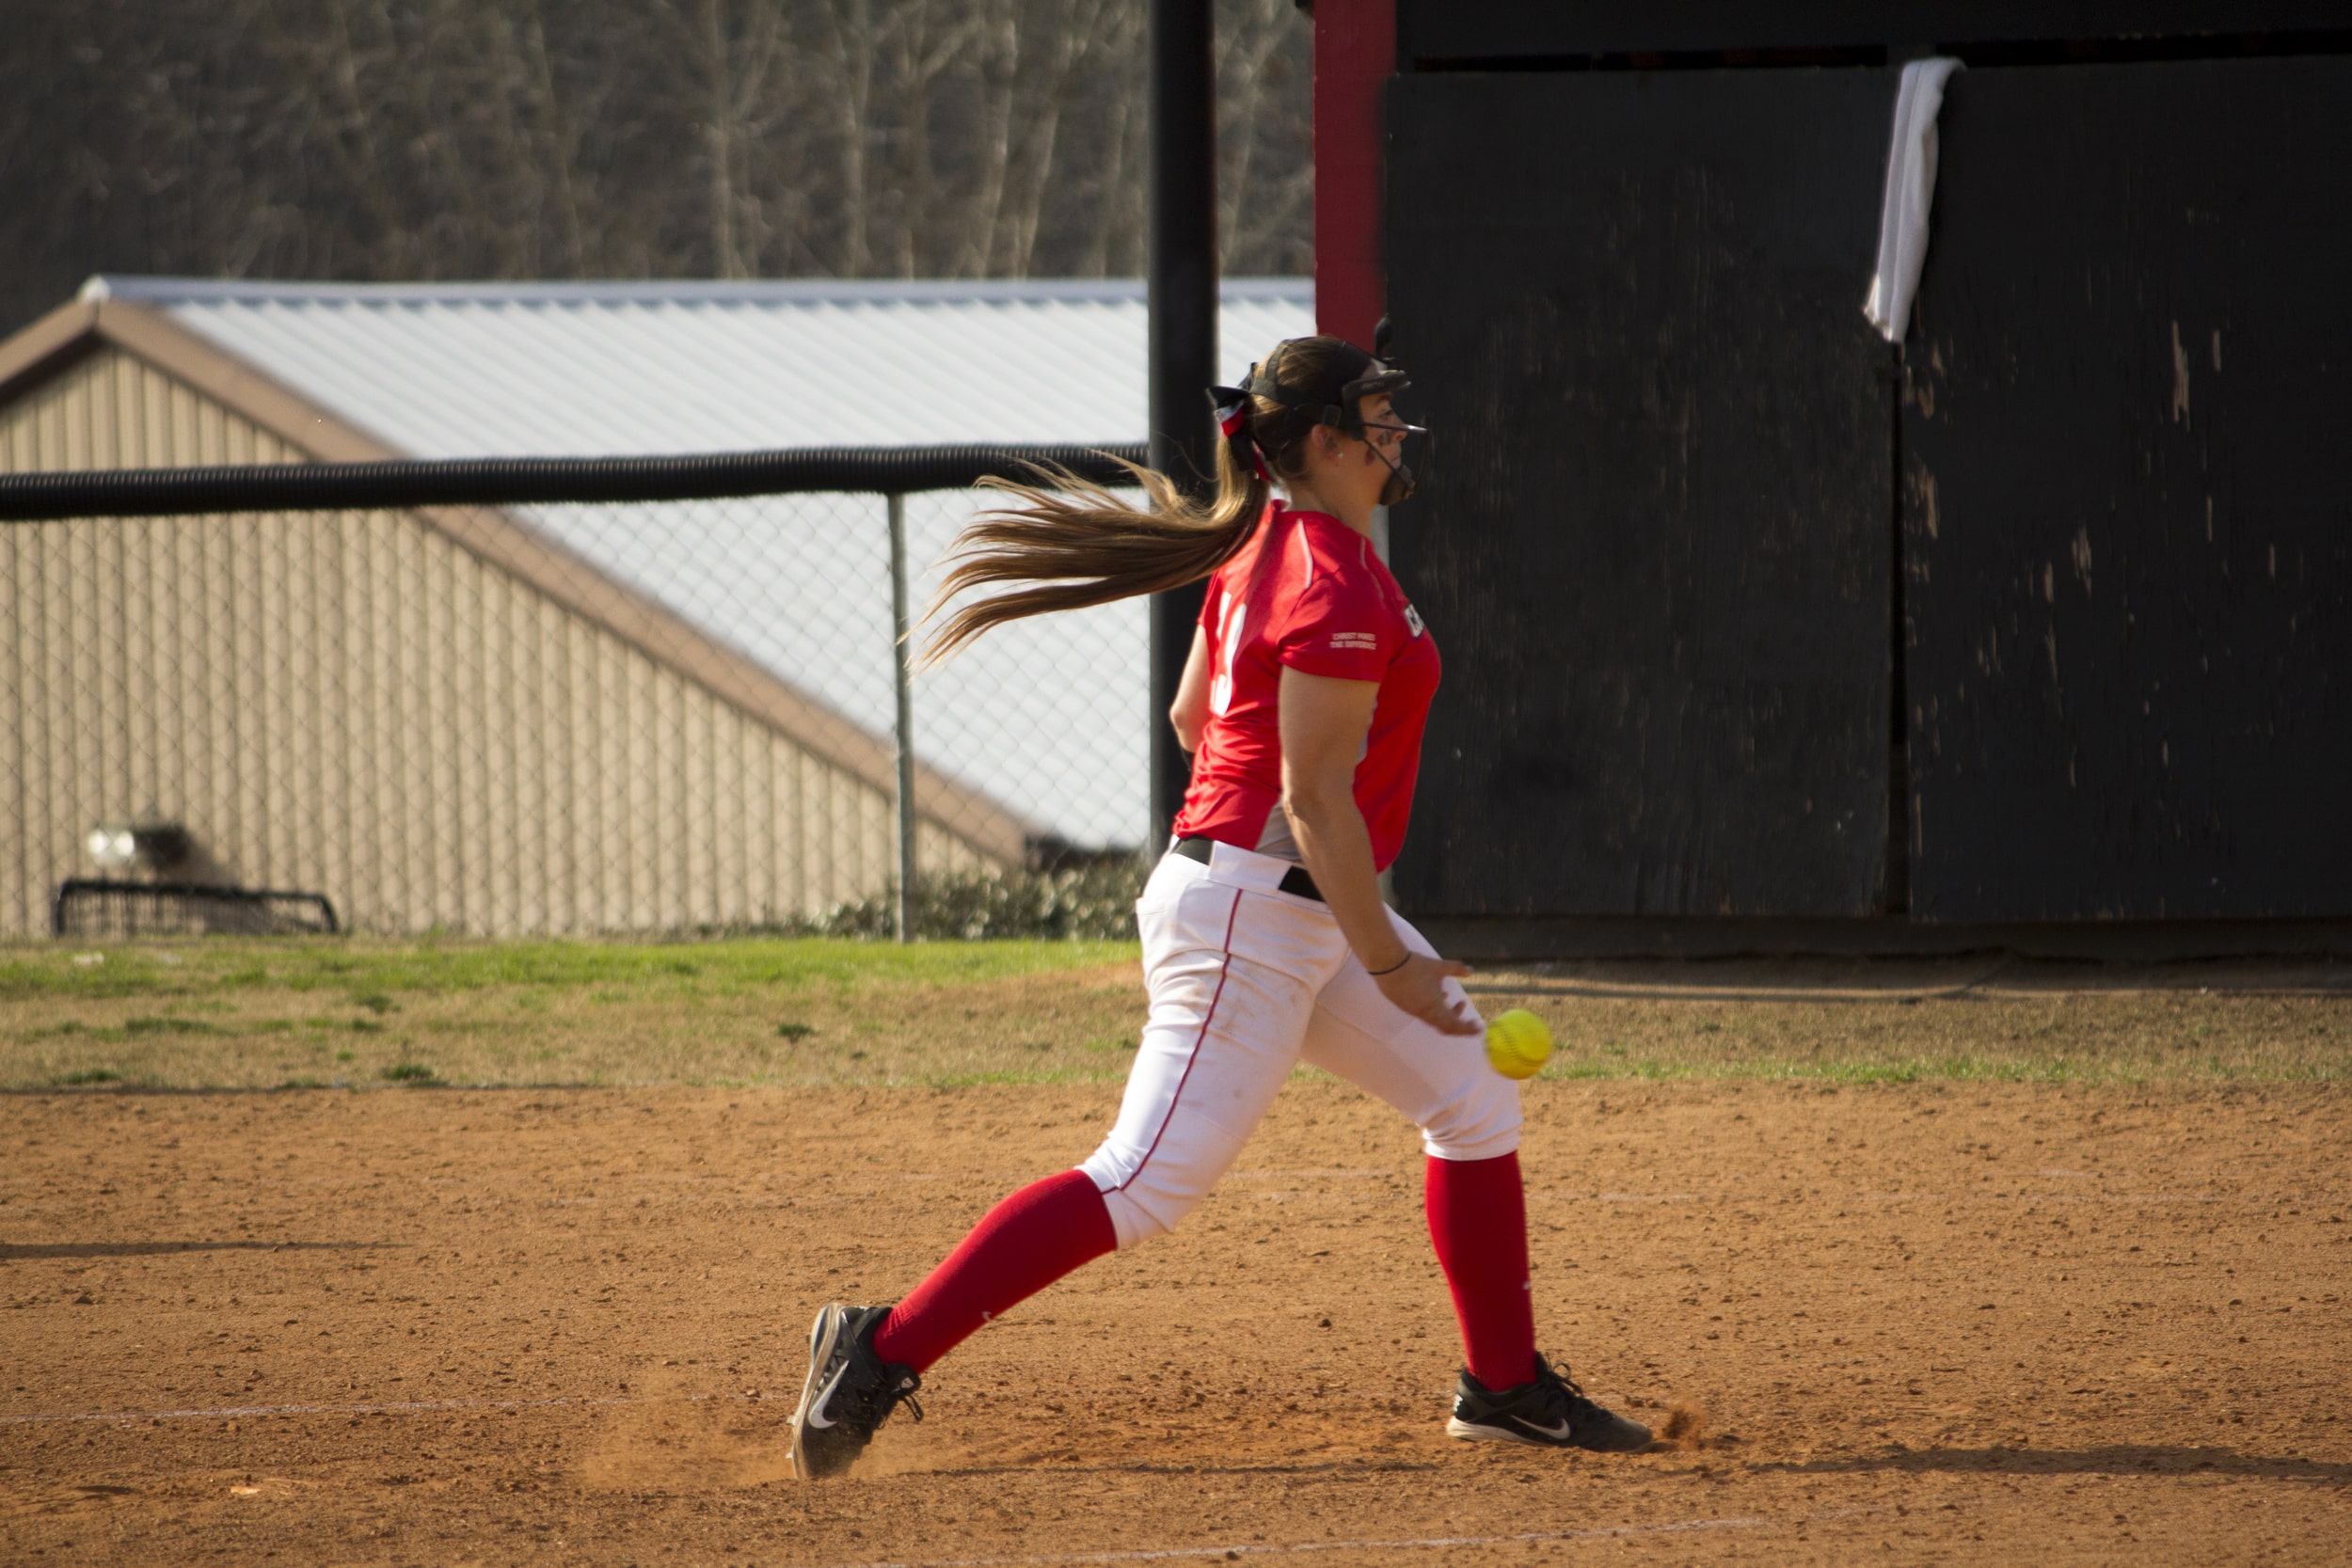  Freshman Emily Murphy pitches the ball towards the rival batter in hopes for a strike. 